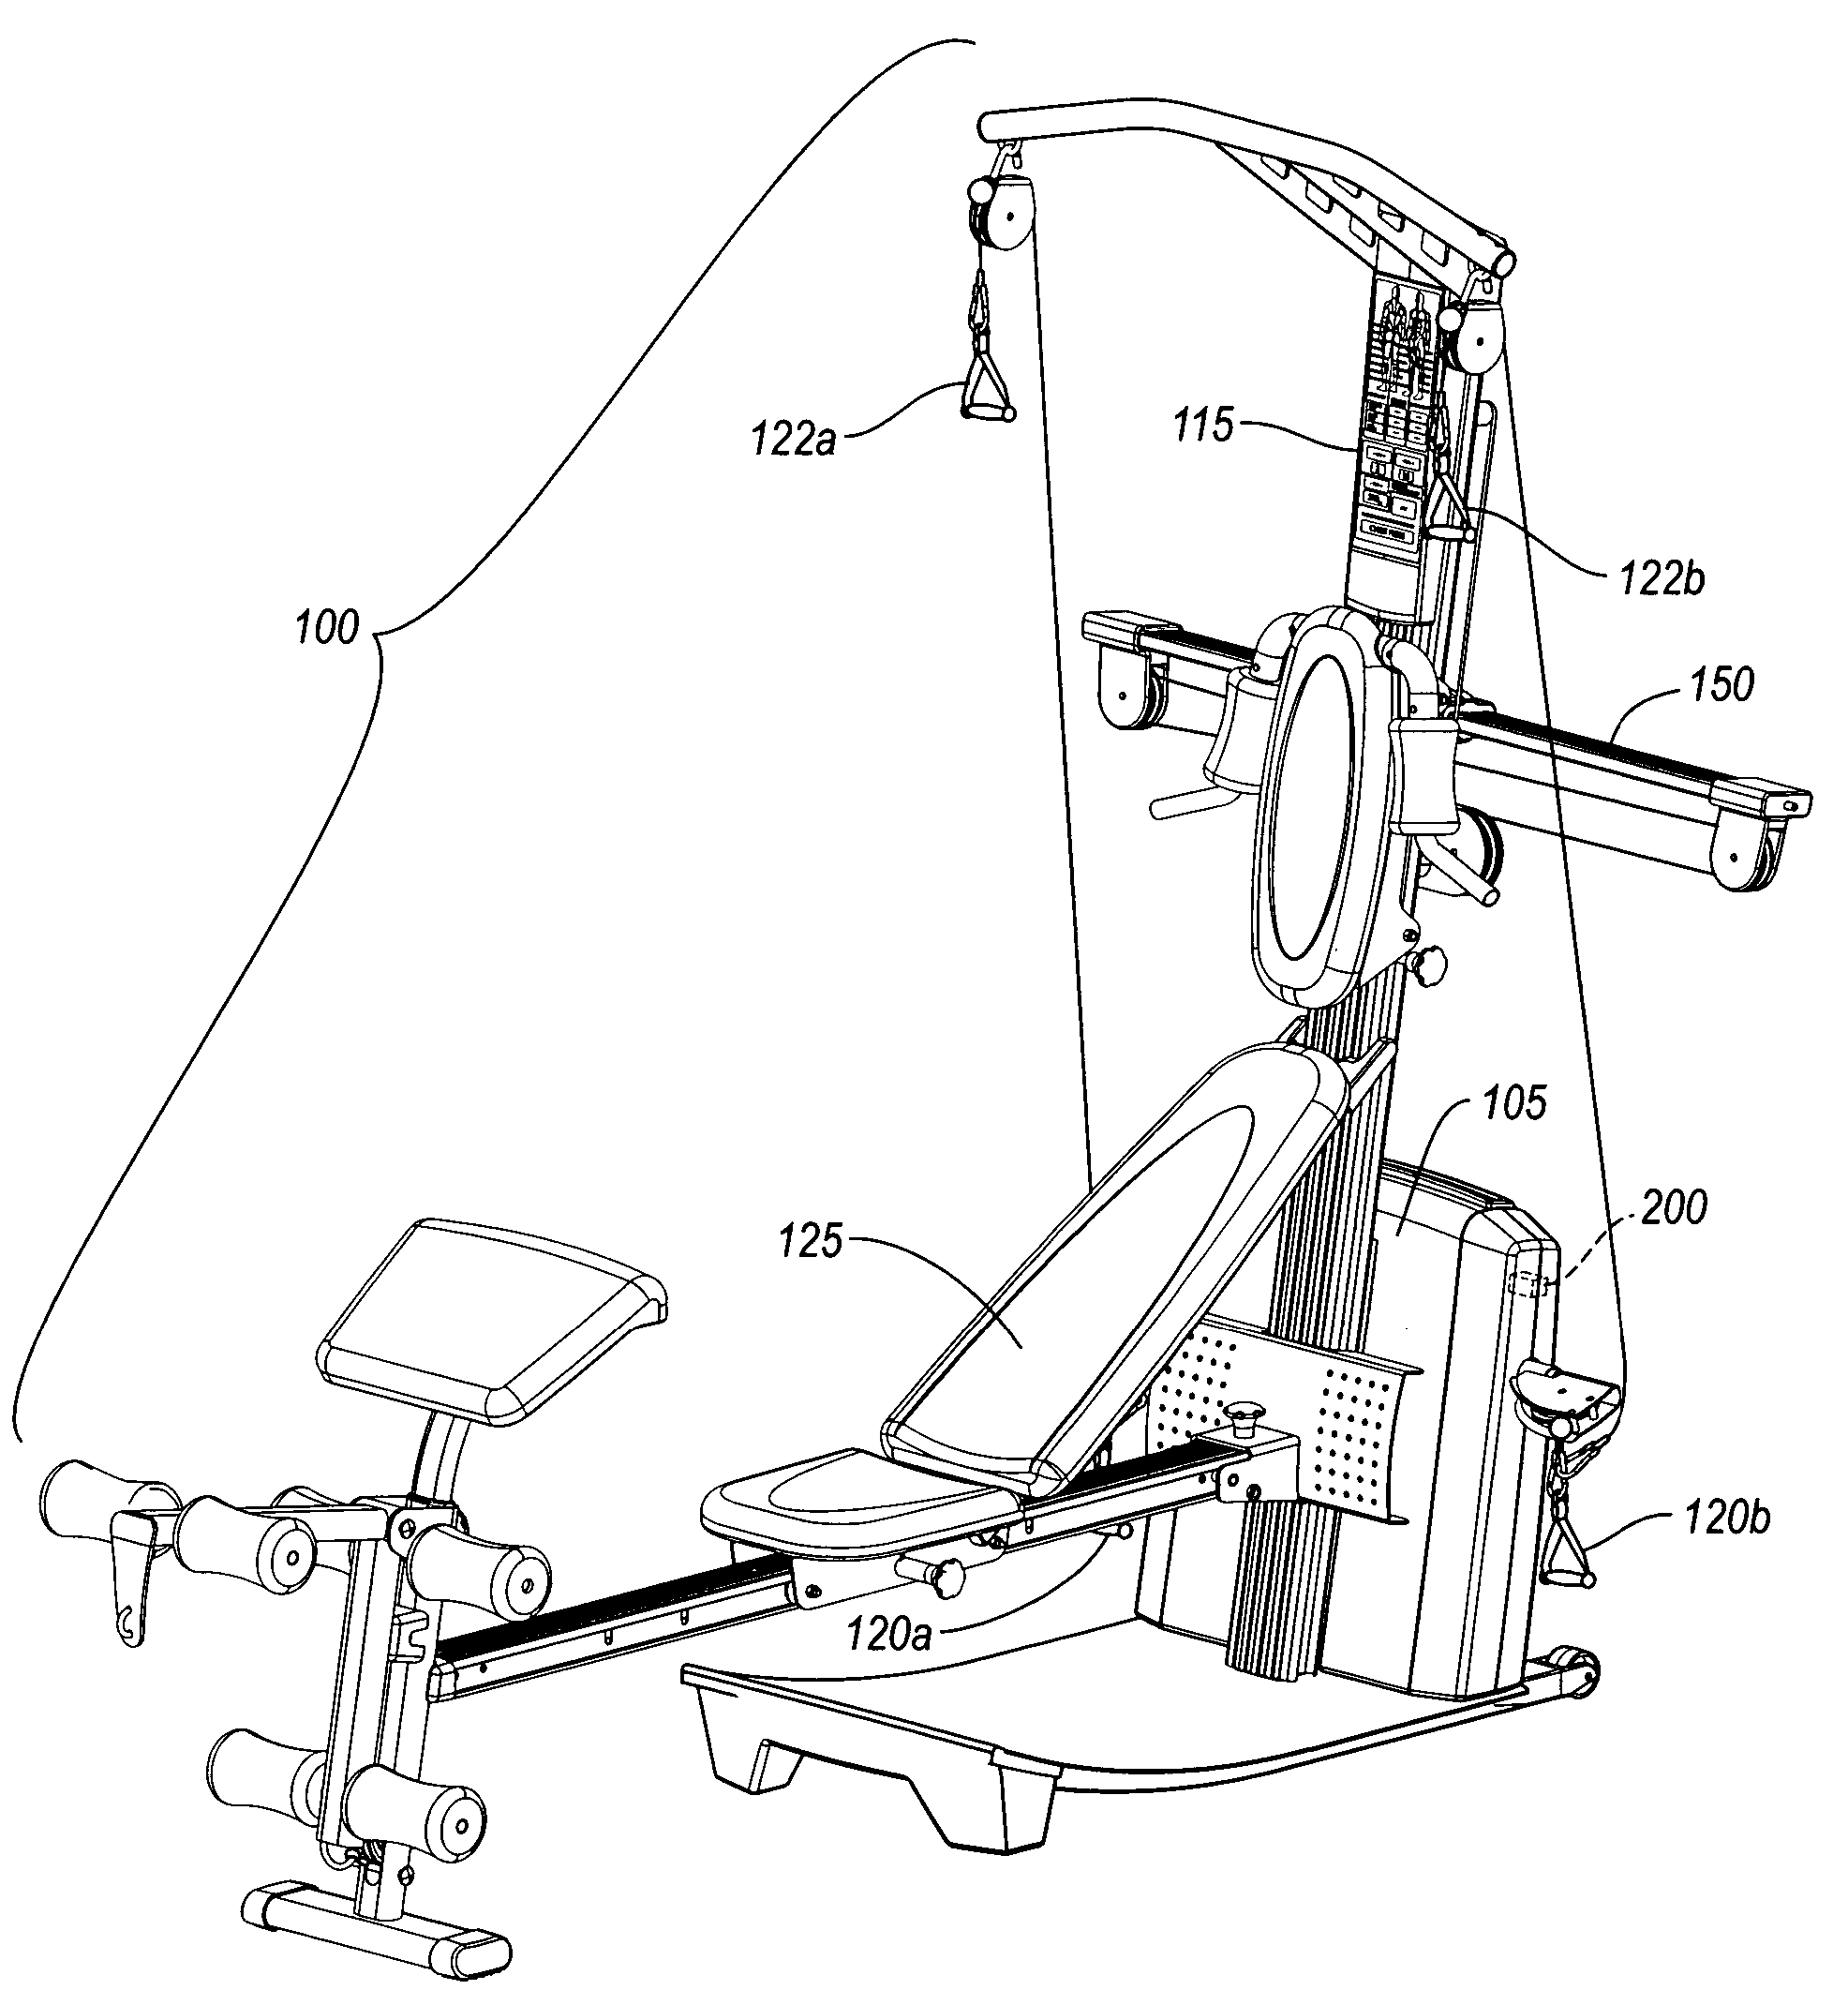 Repetition sensor in exercise equipment